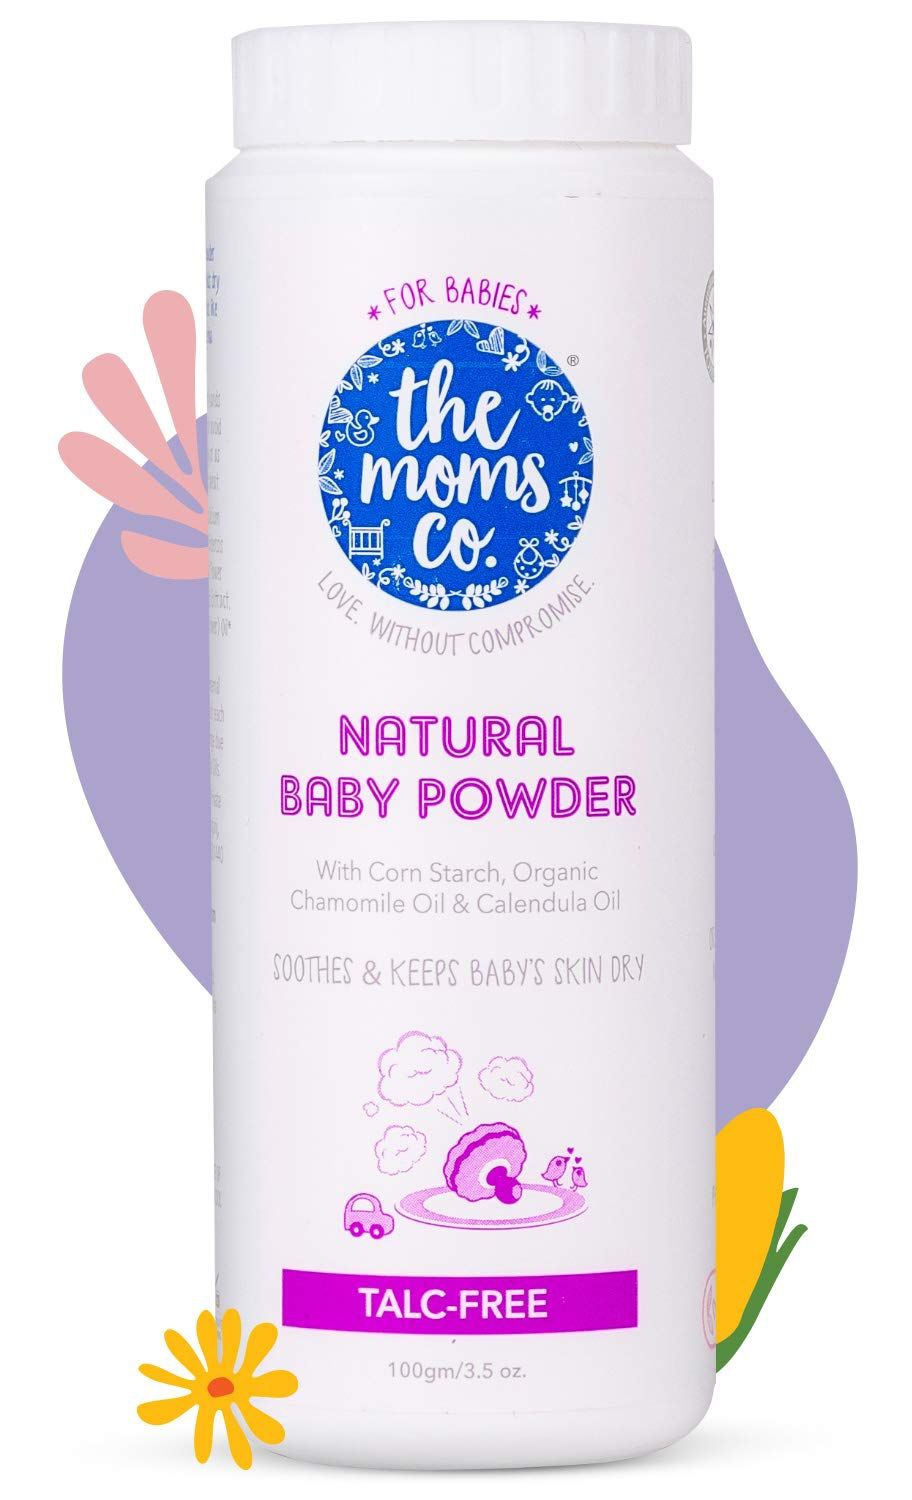 The Mom's Co. Talc-Free Natural Baby Powder